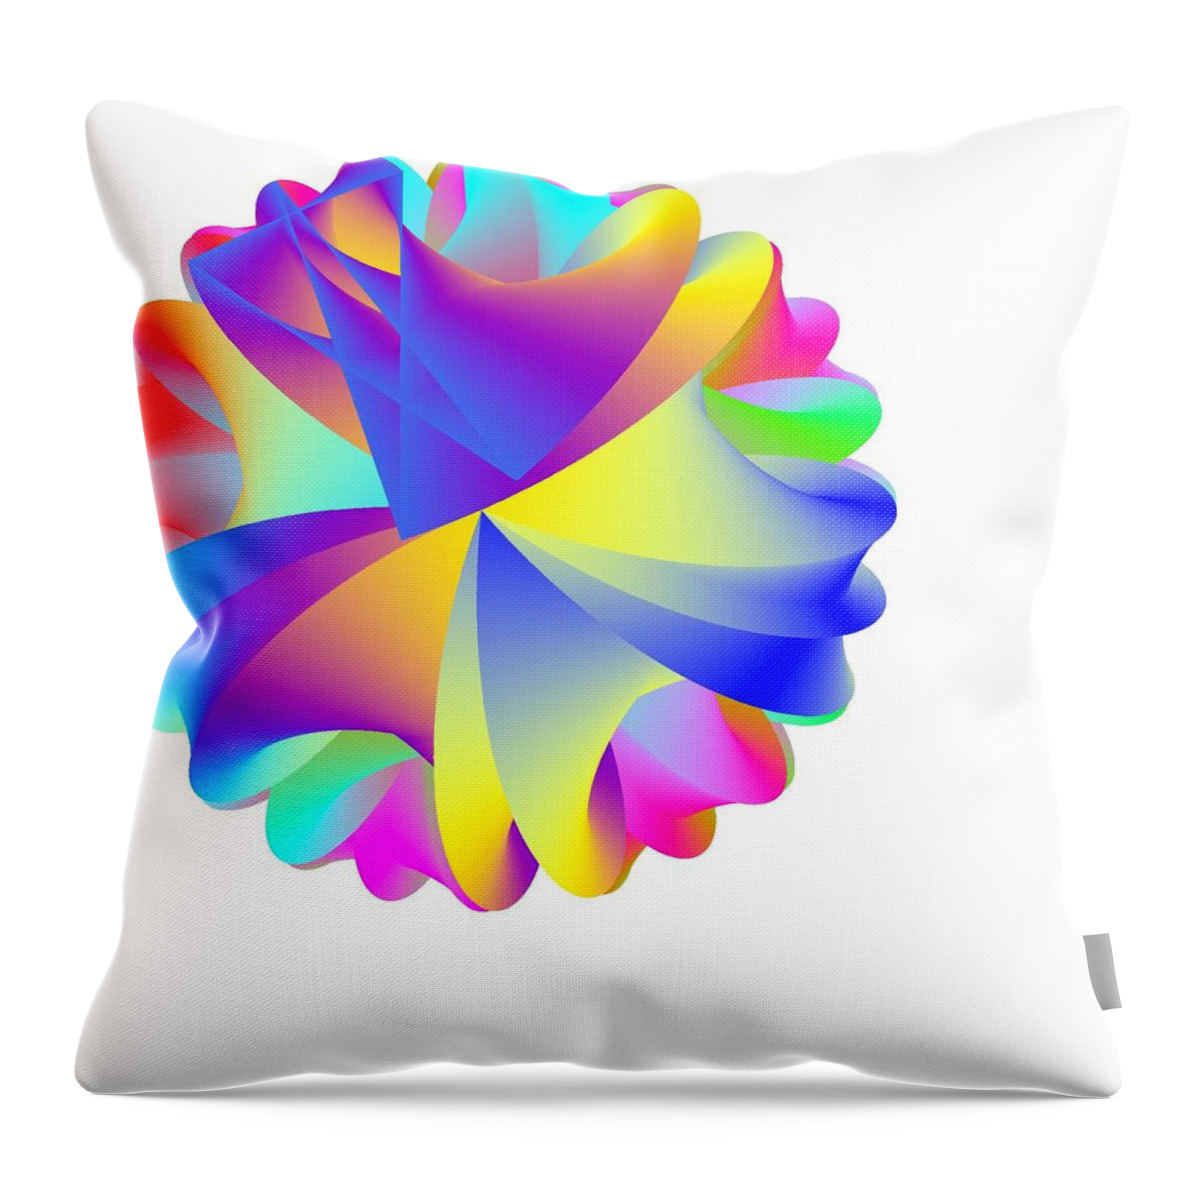 Rainbow Cluster Throw Pillow featuring the digital art Rainbow Cluster by Michael Skinner